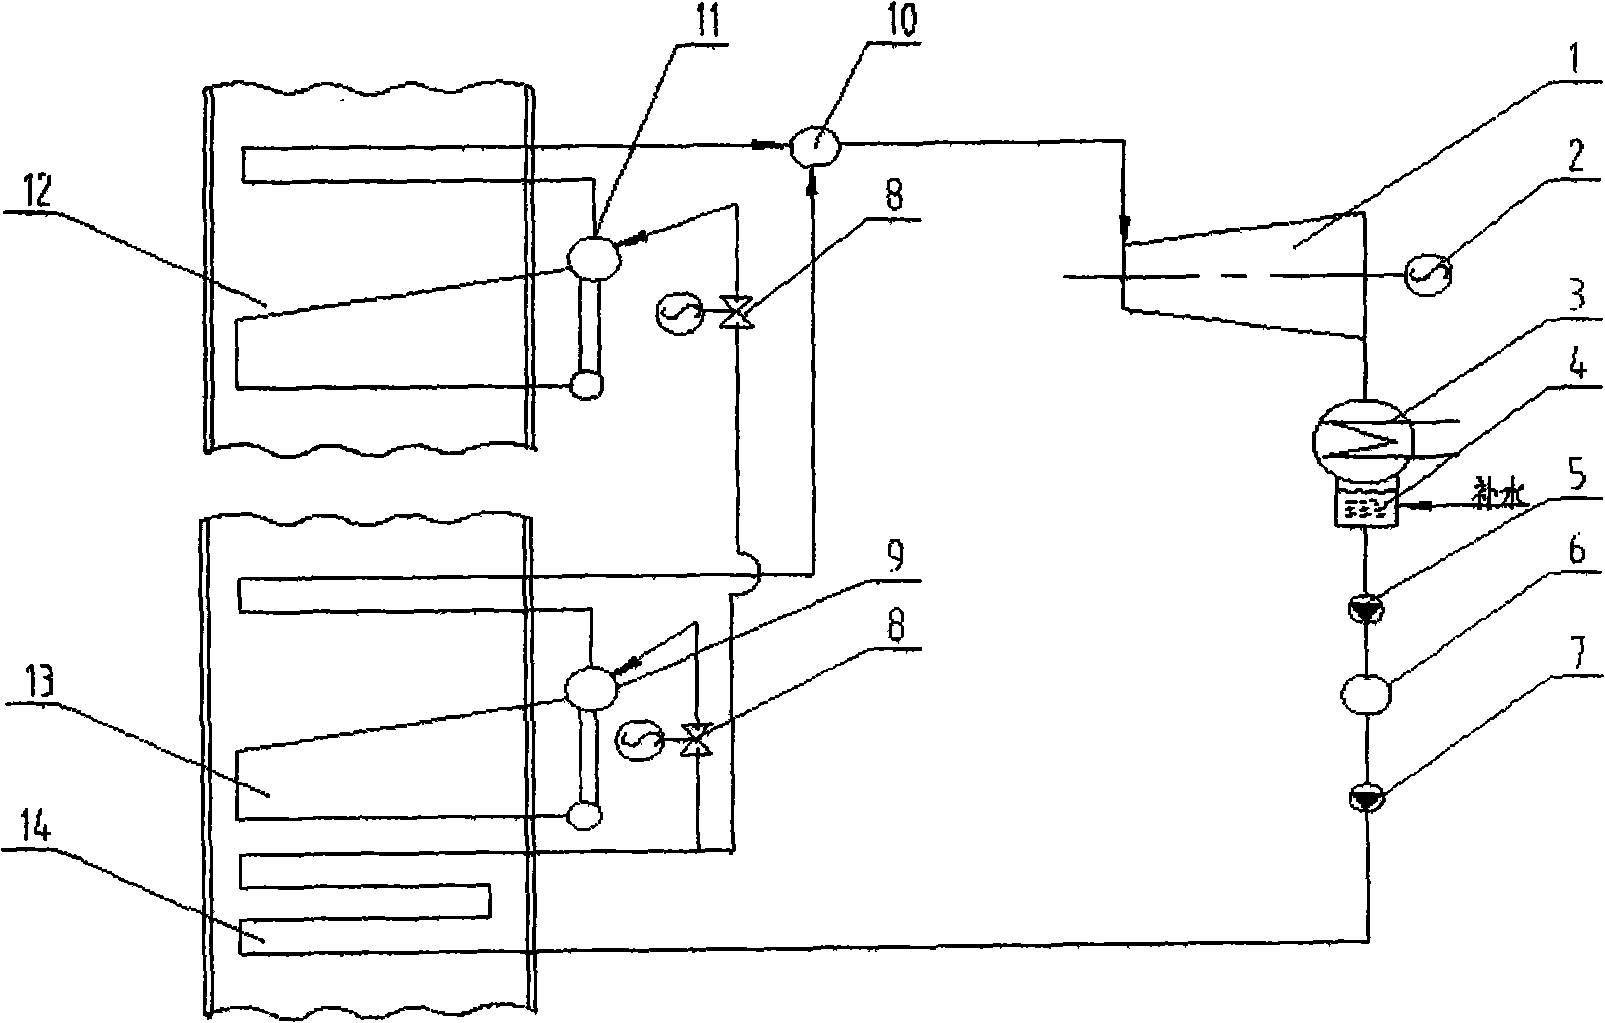 After heat power station heat system for performing vacuum deoxidization using steam turbine condenser